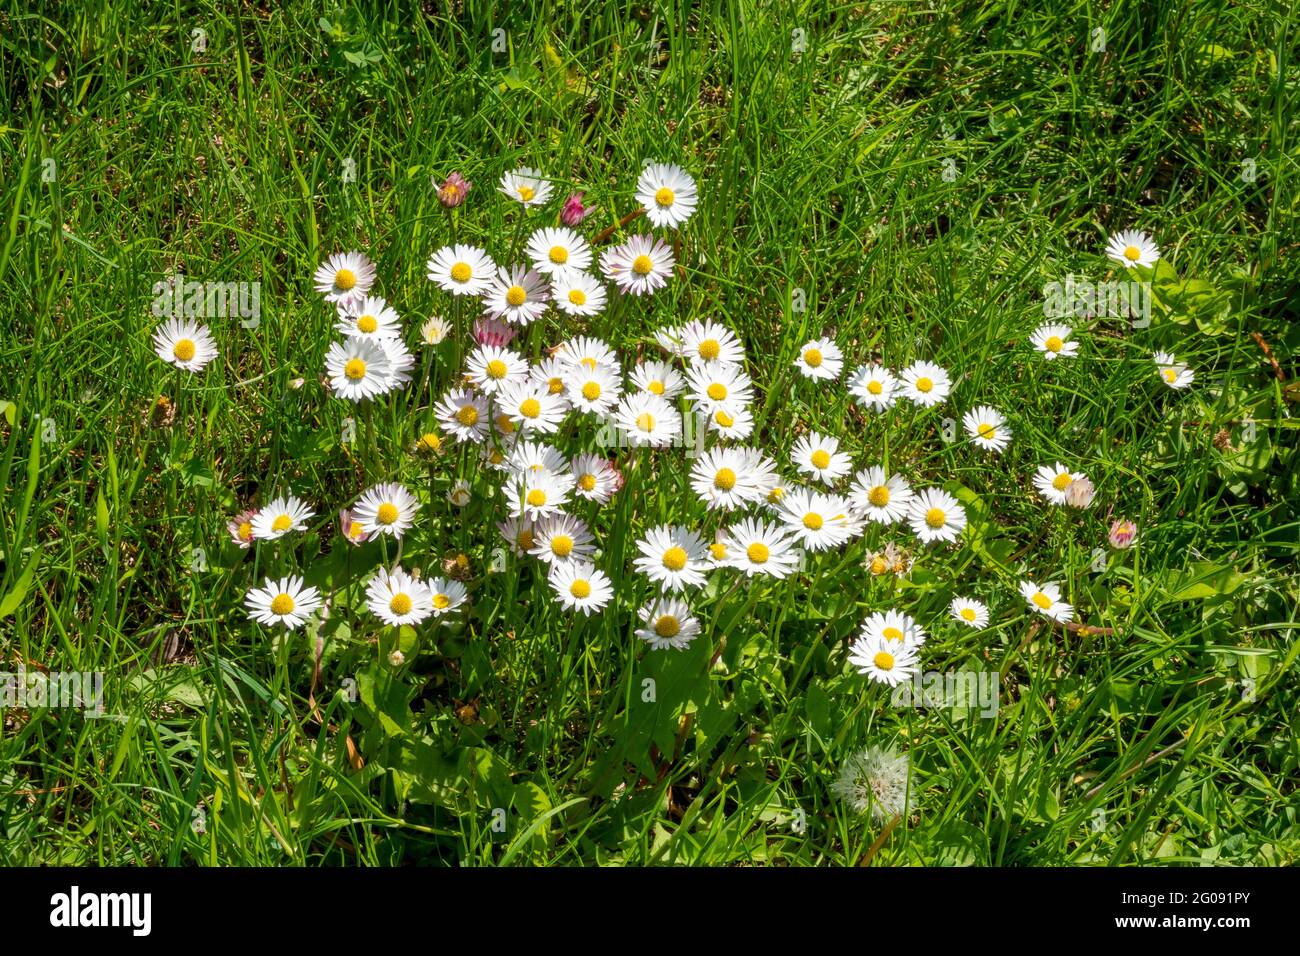 A small group of common daisies in rough field grass Stock Photo